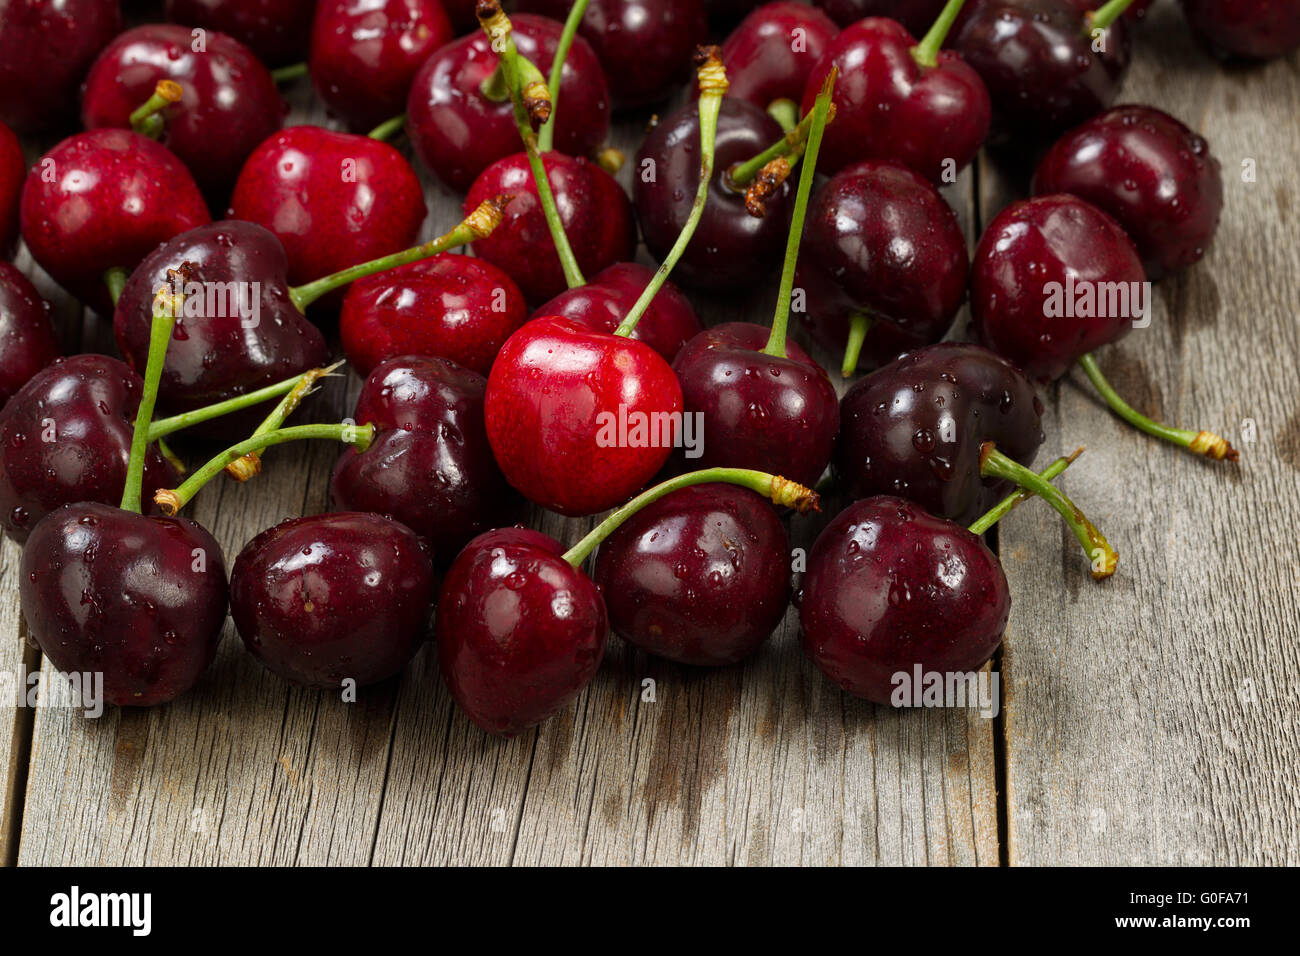 Ripe whole black cherries on rustic wood ready to eat Stock Photo